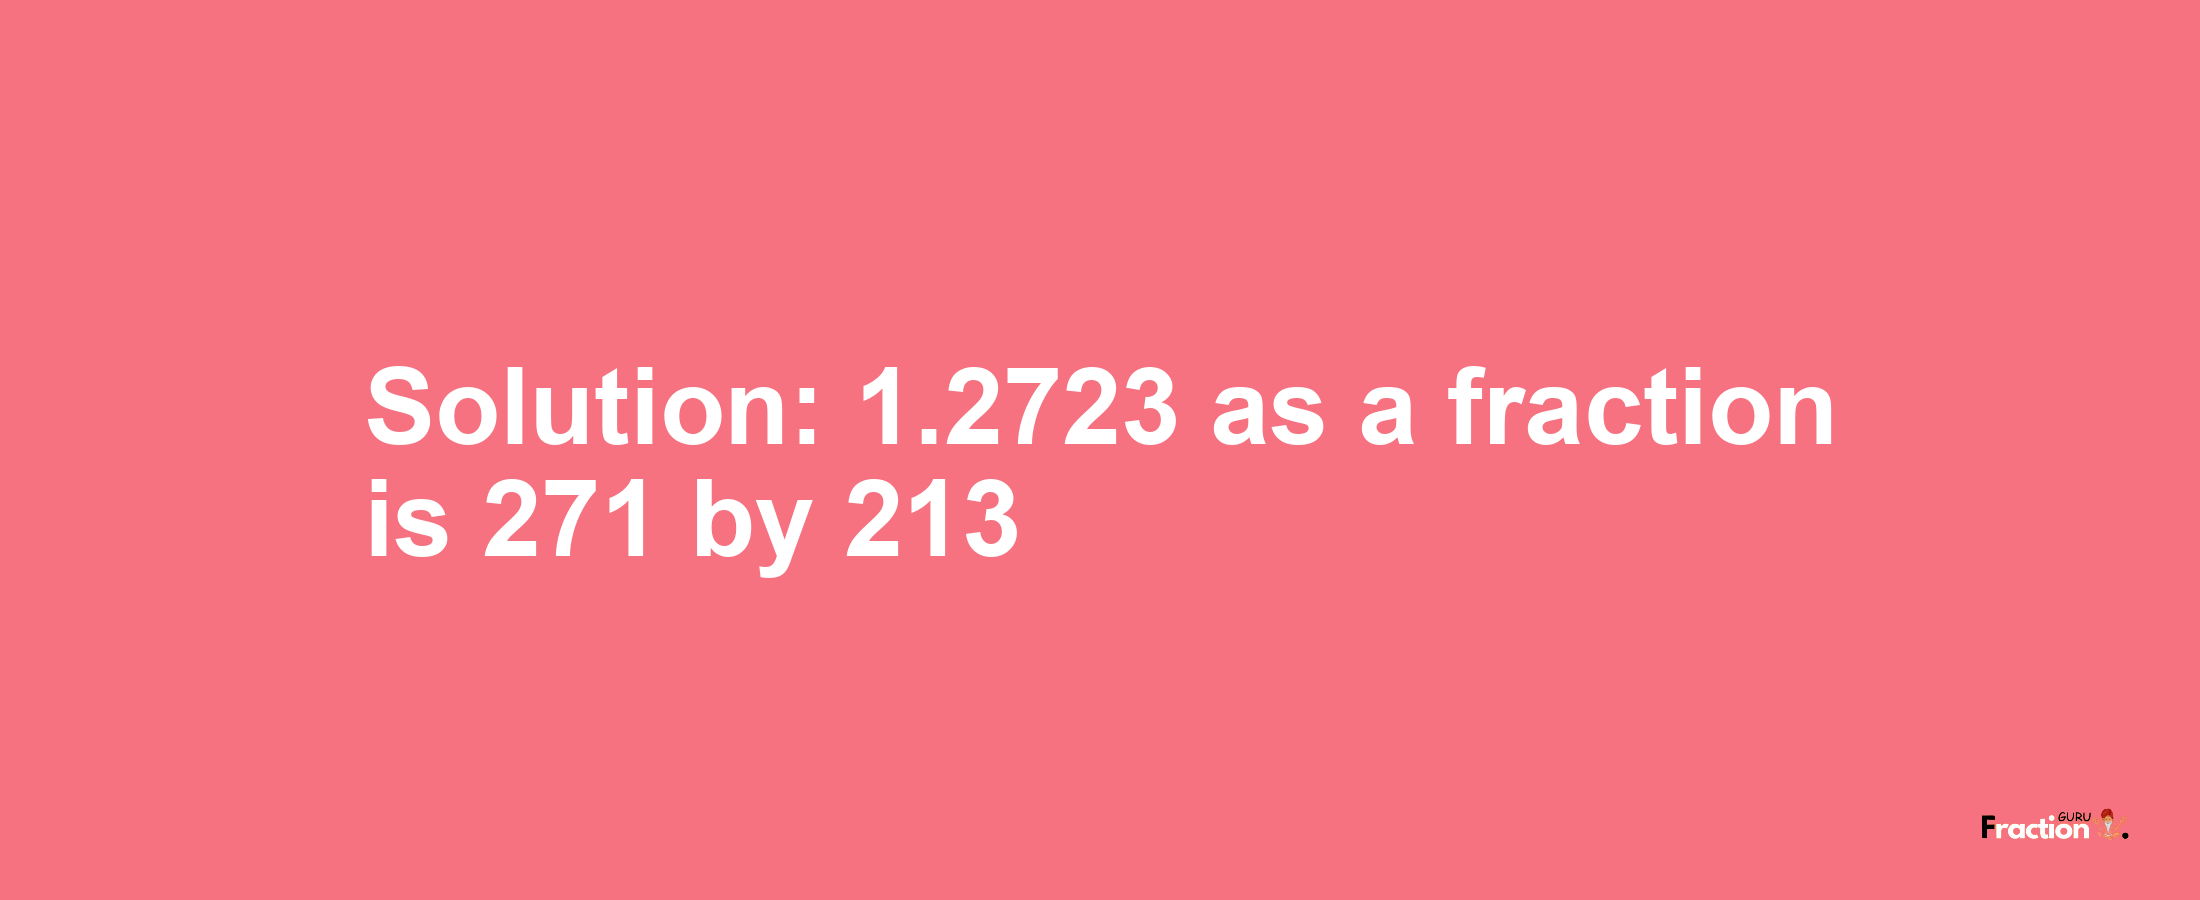 Solution:1.2723 as a fraction is 271/213